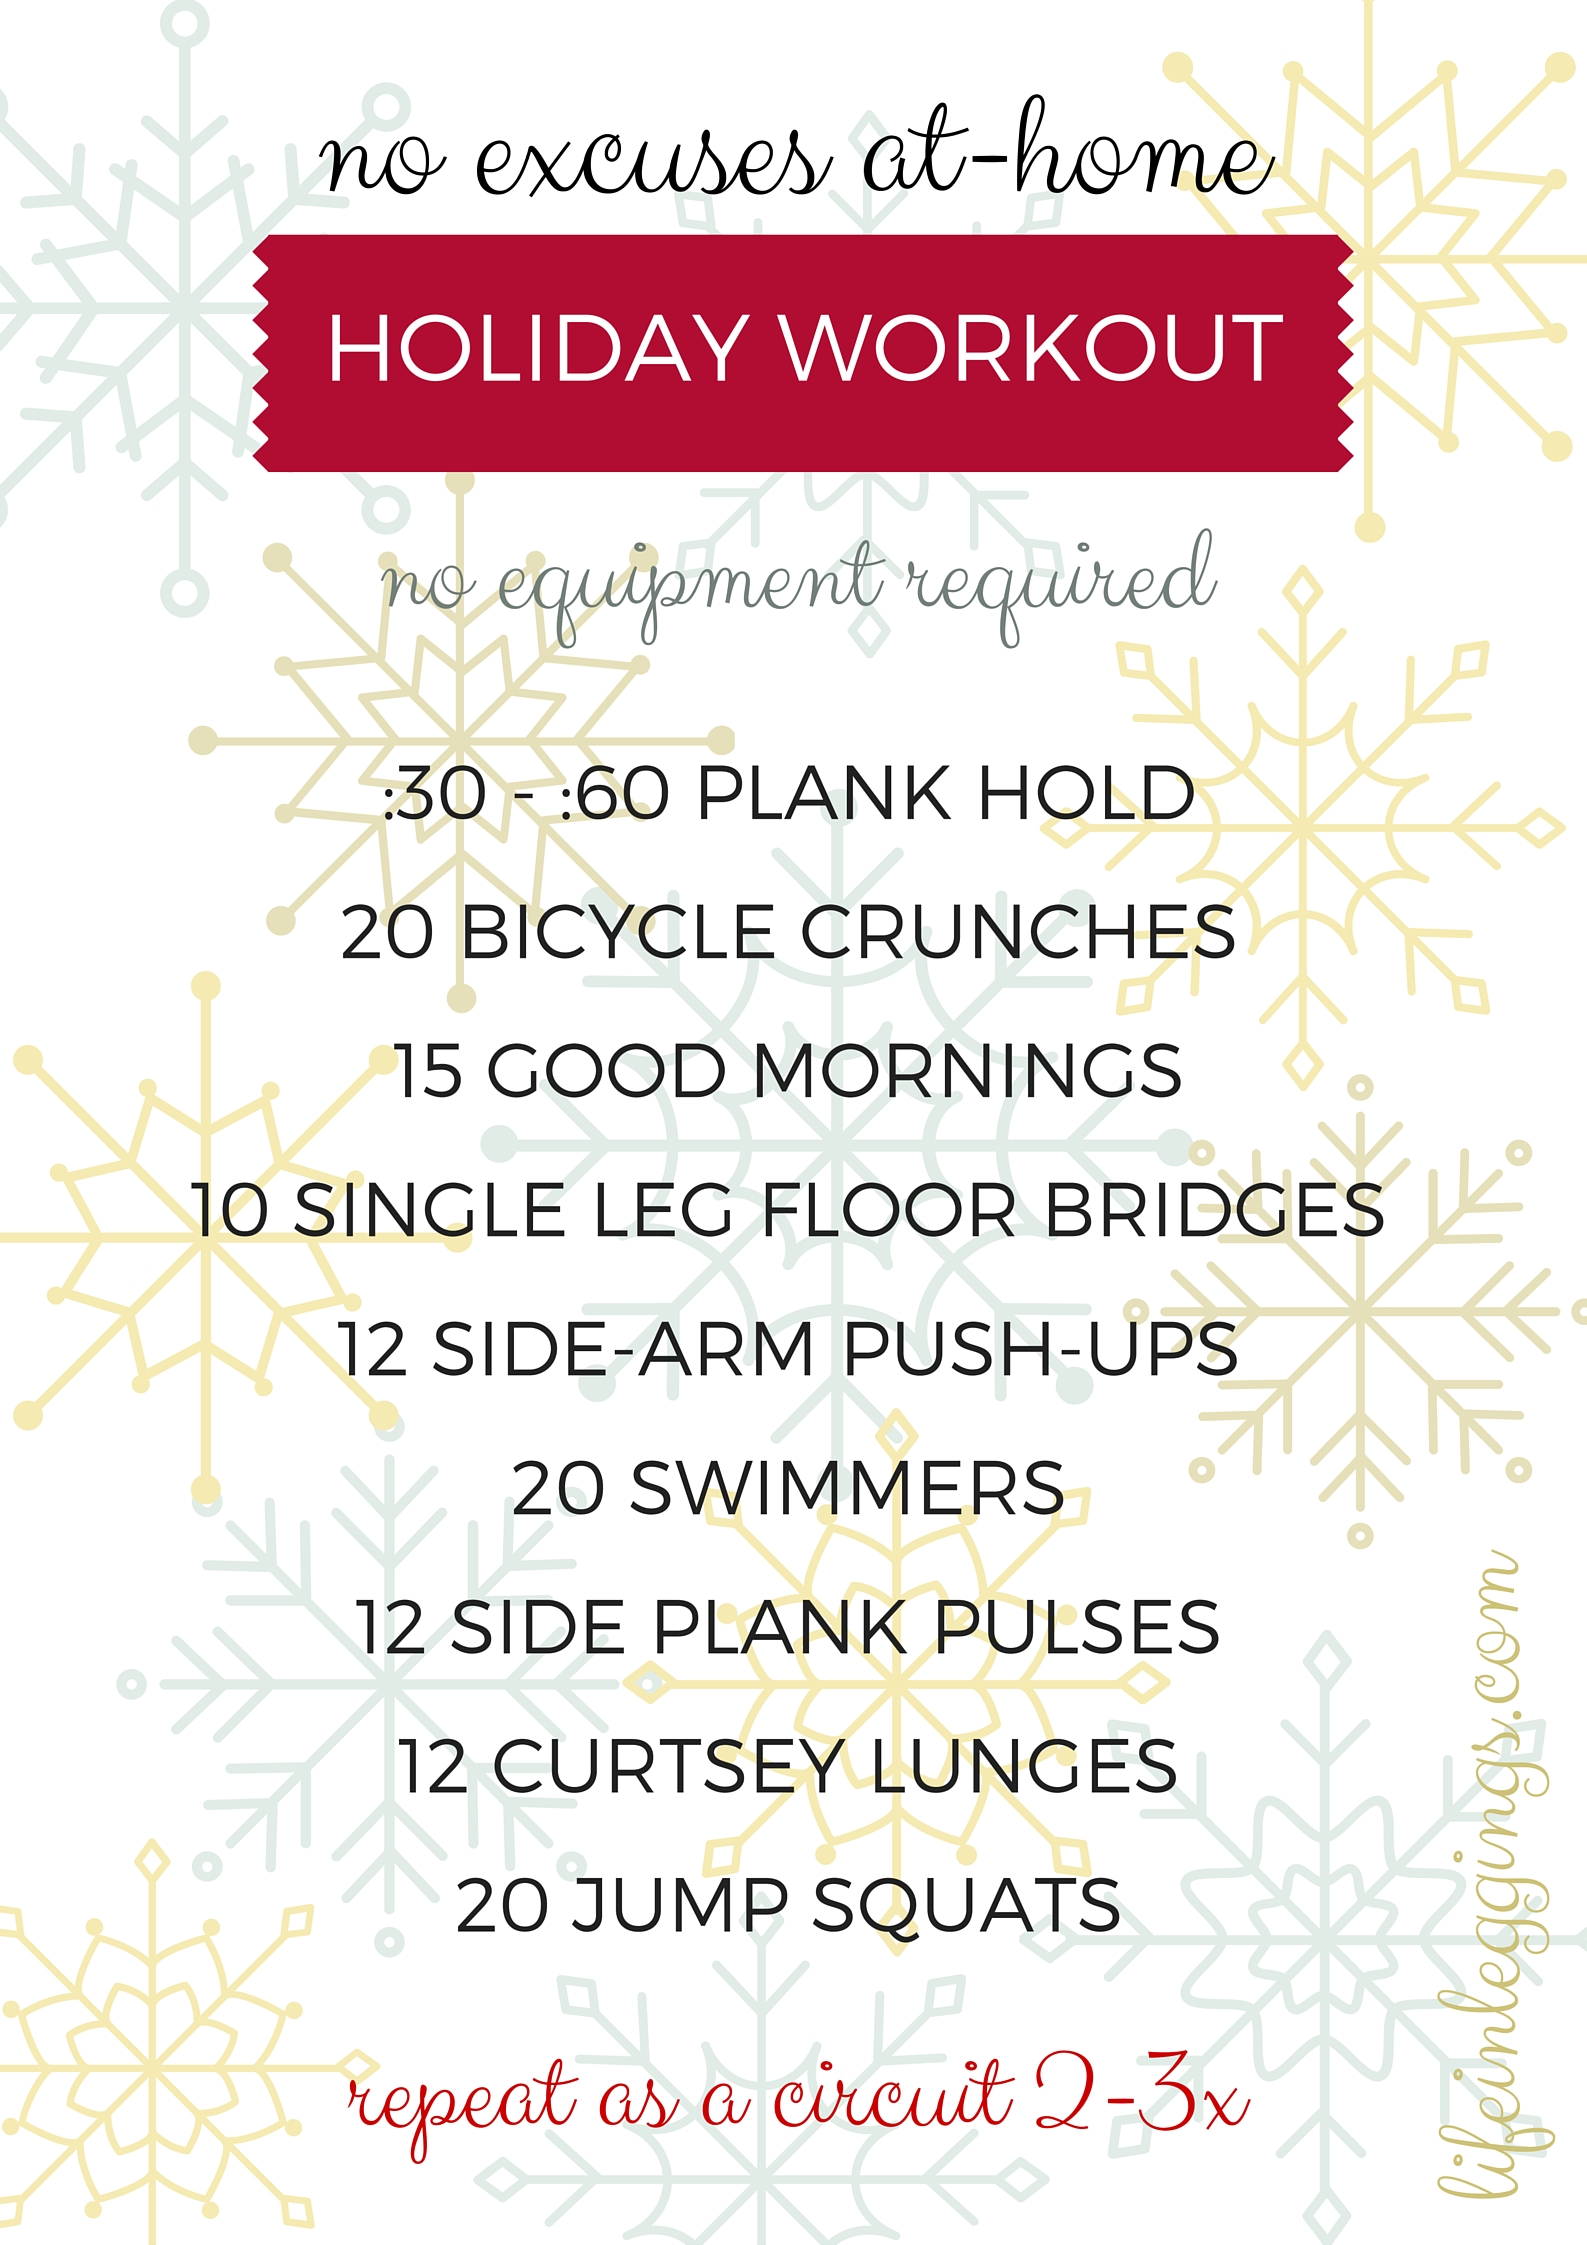 no excuses at-home bodyweight holiday workout